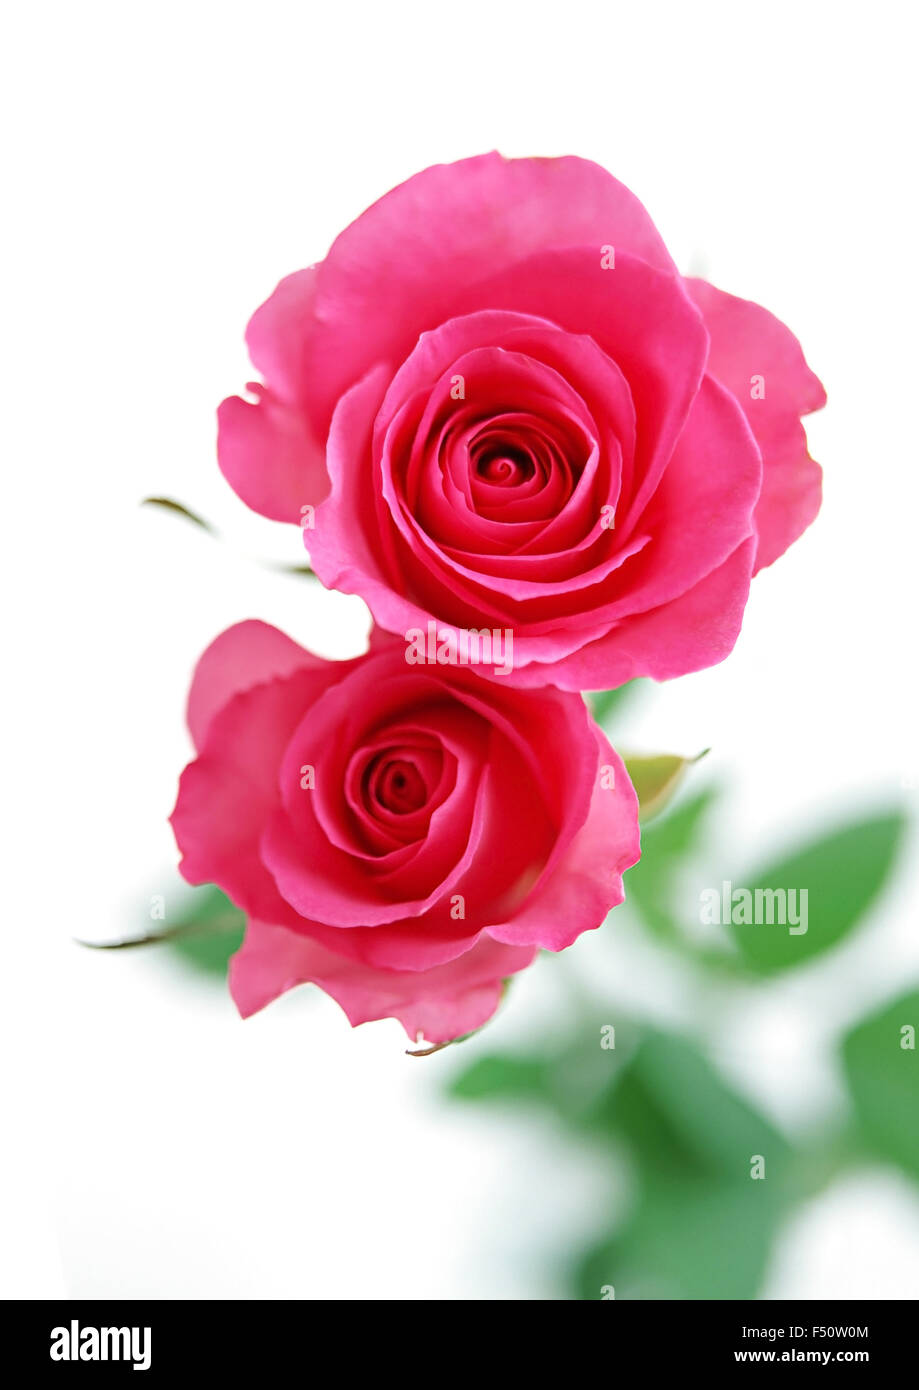 Two red rose flowers on white background Stock Photo